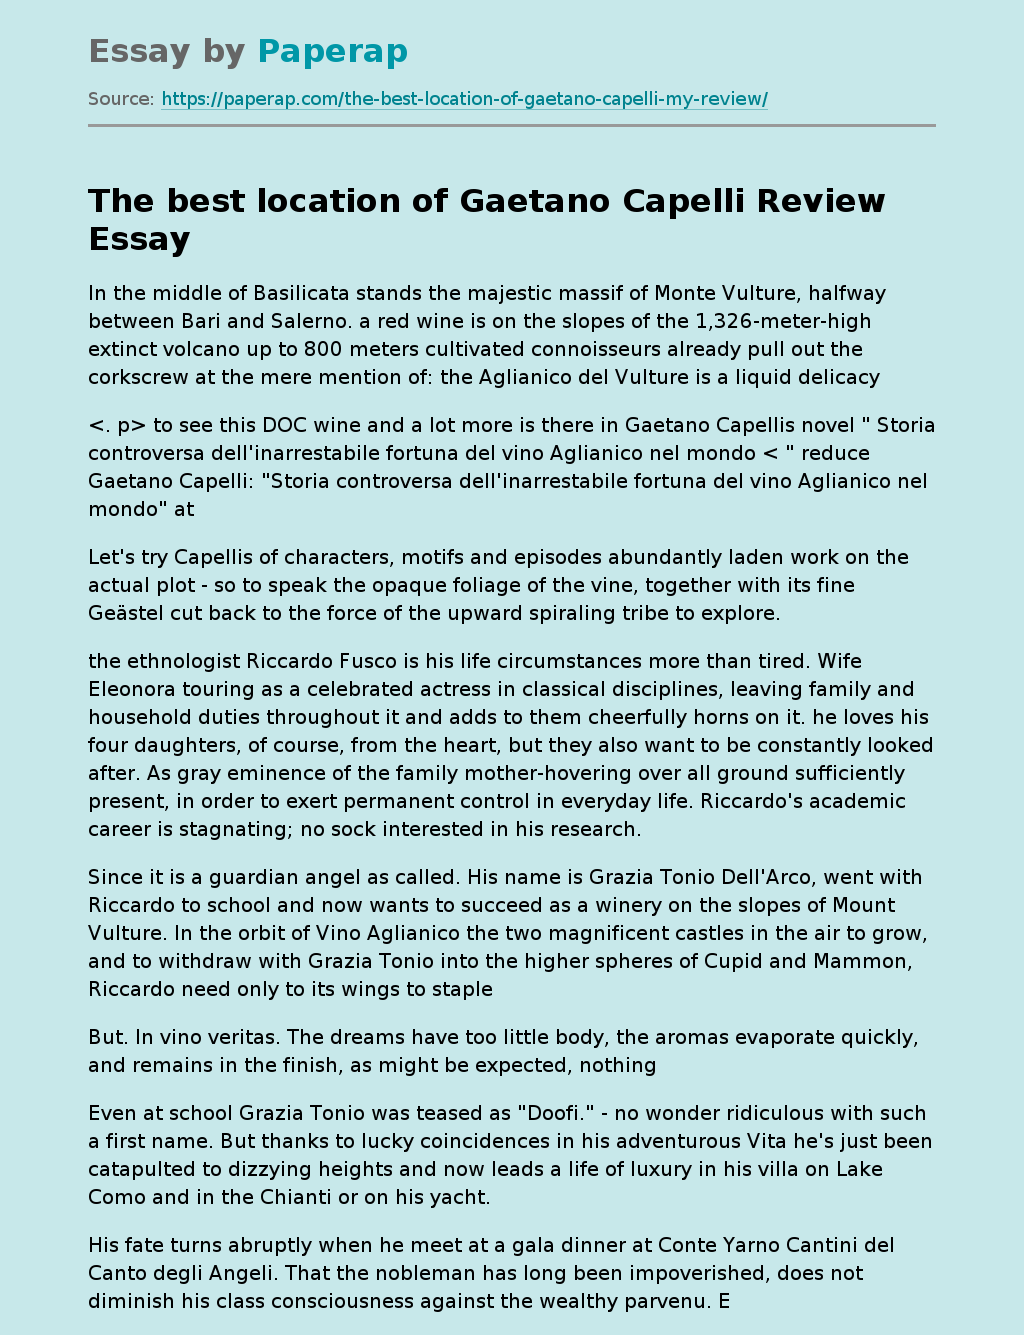 The best location of Gaetano Capelli Review